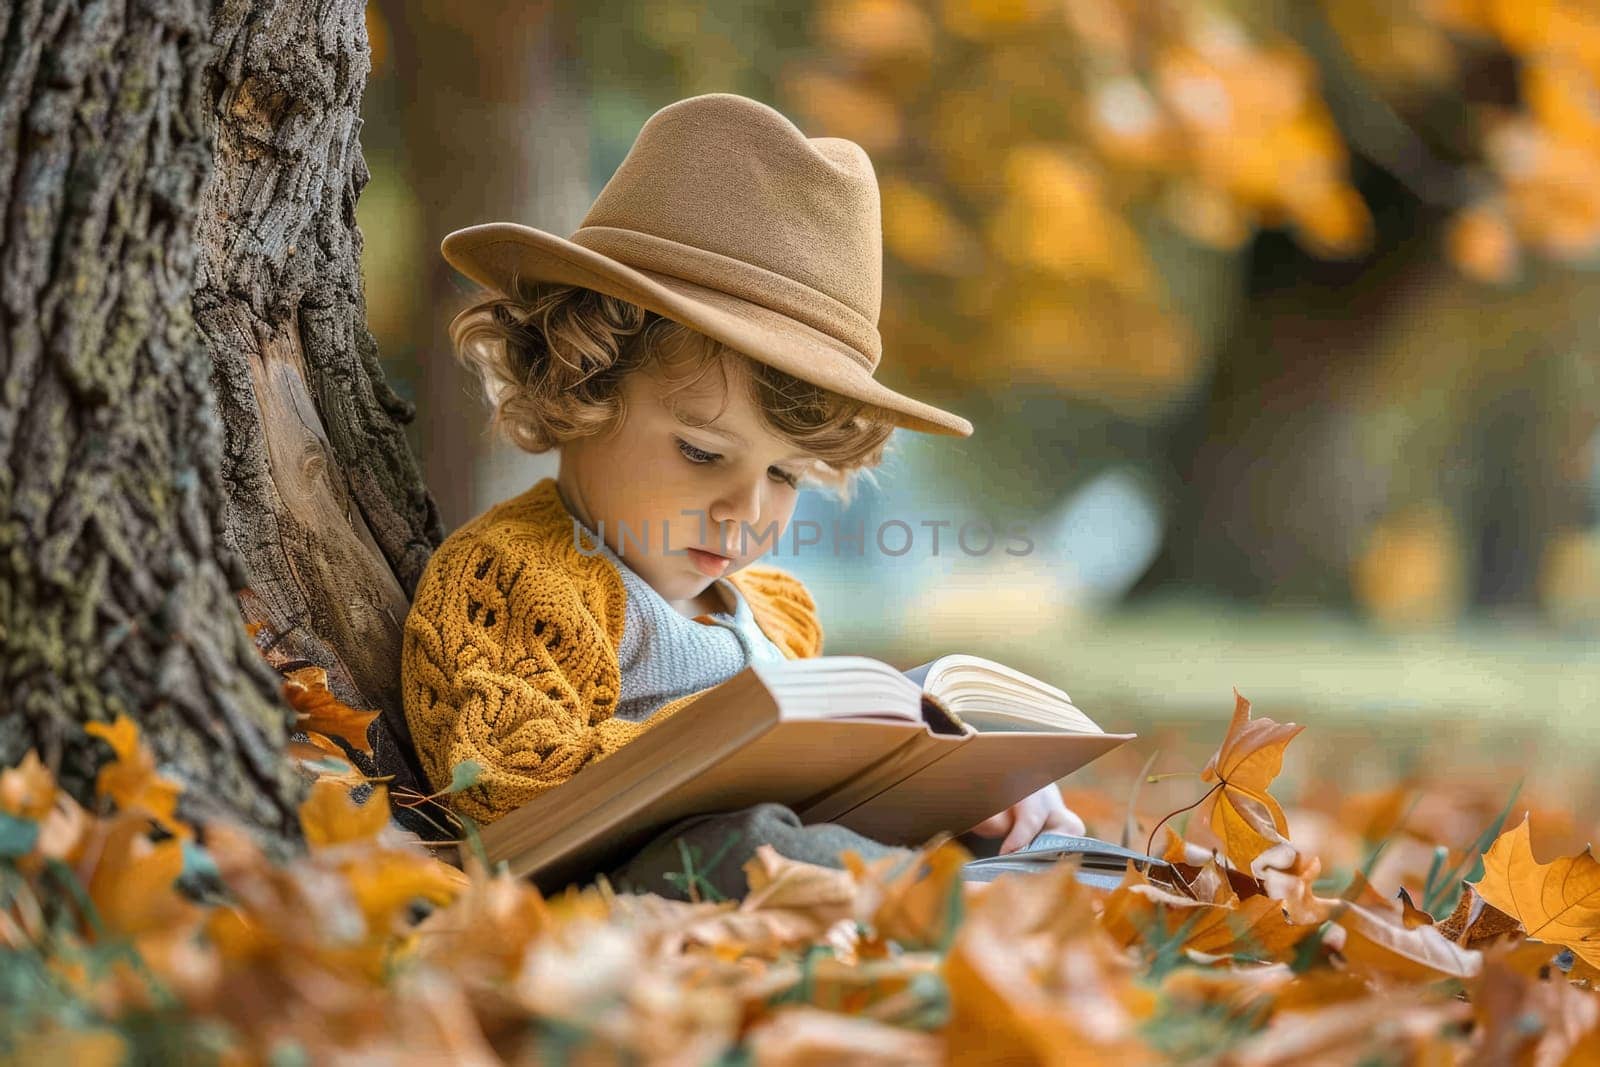 Cute child reading book under tree in autumn park. Concept of imagination, childhood, and fall season.